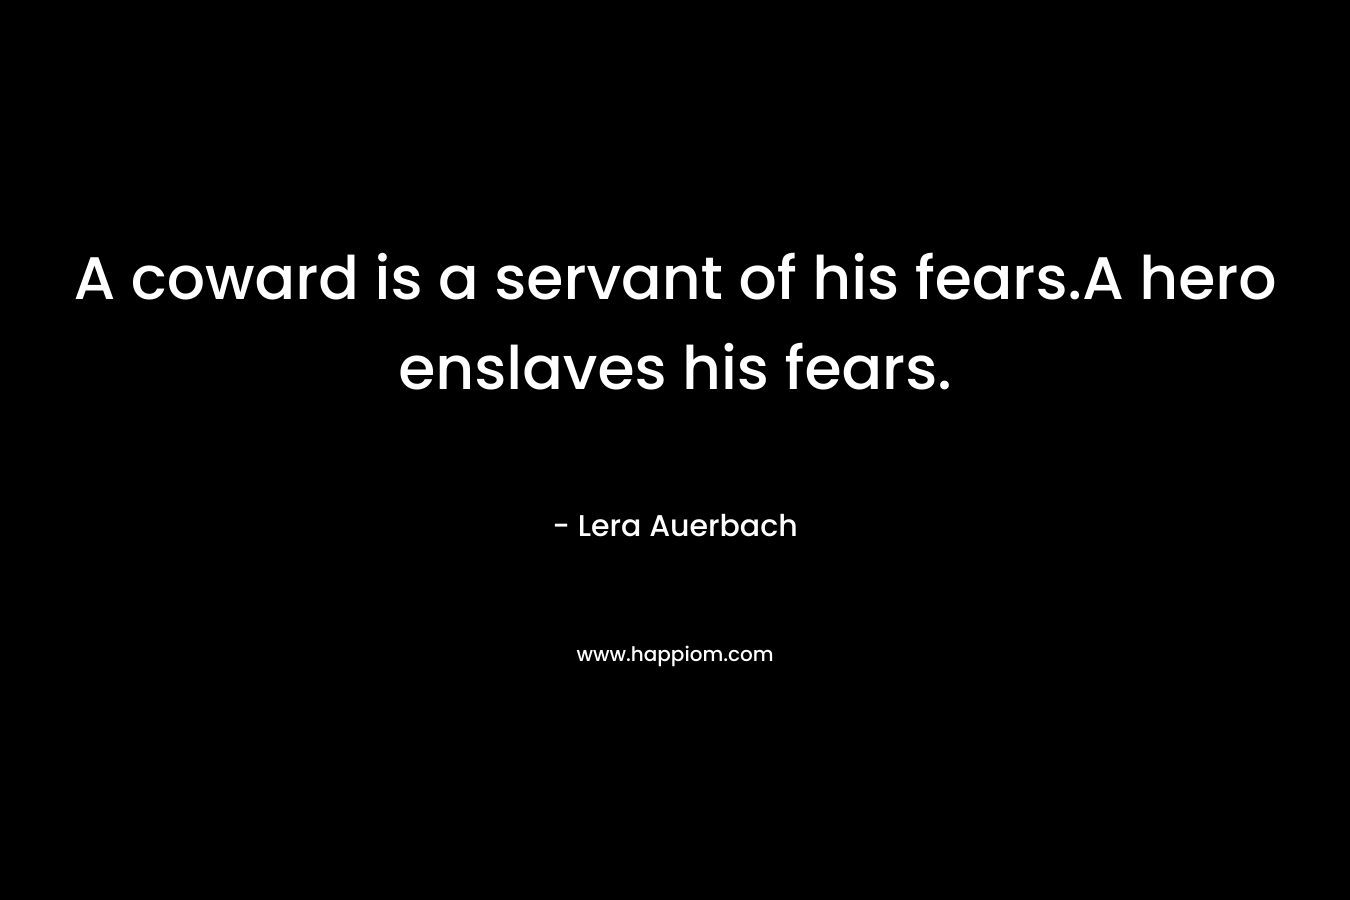 A coward is a servant of his fears.A hero enslaves his fears.